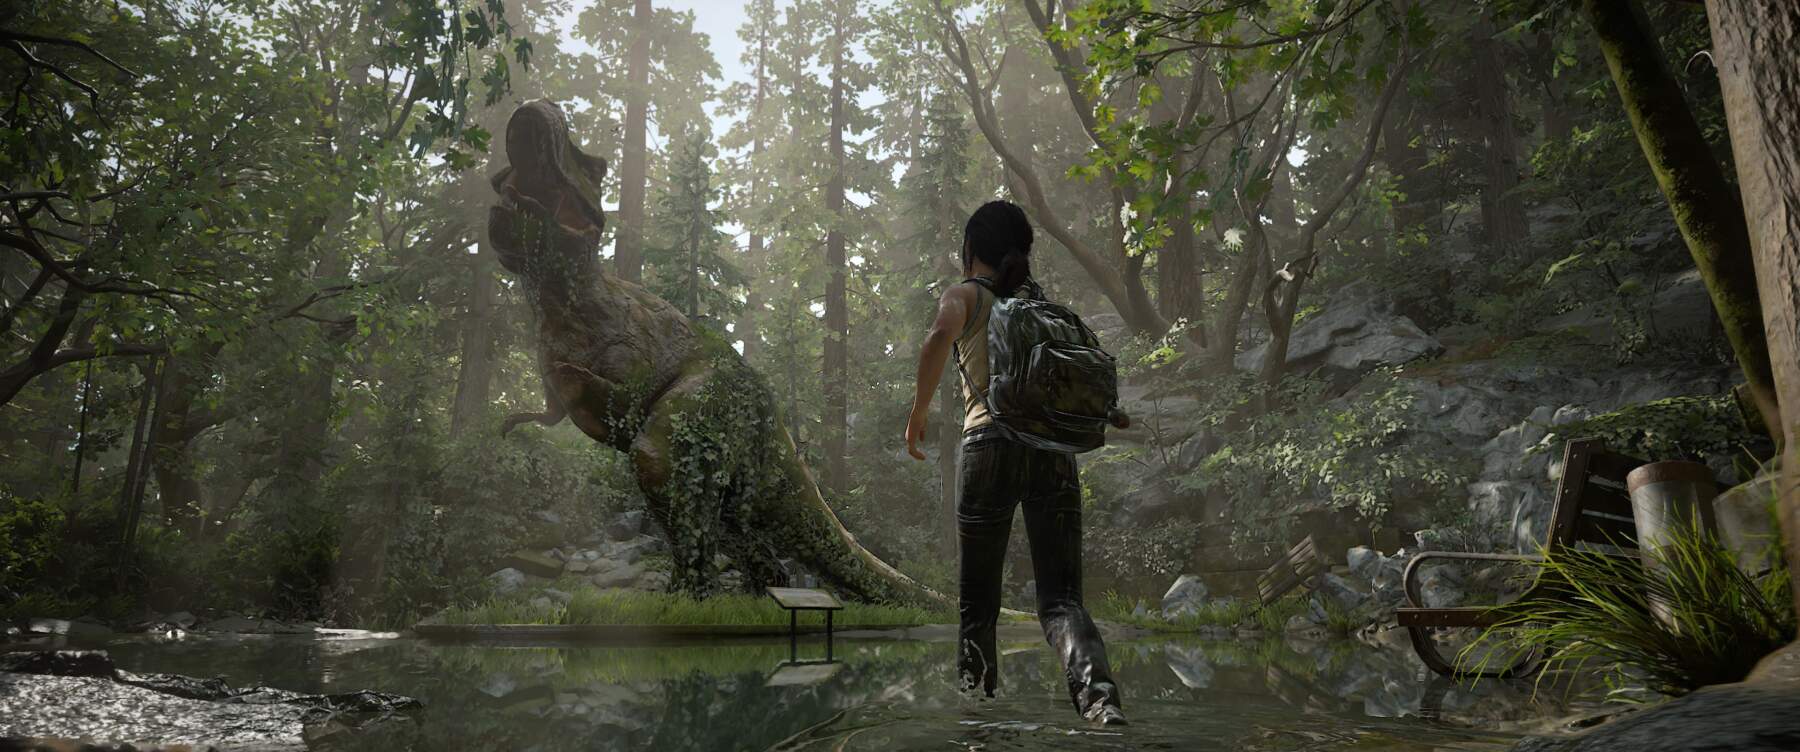 A flashback with Joel and Ellie, in "The Last of Us: Part II", captured by Marty Friedel